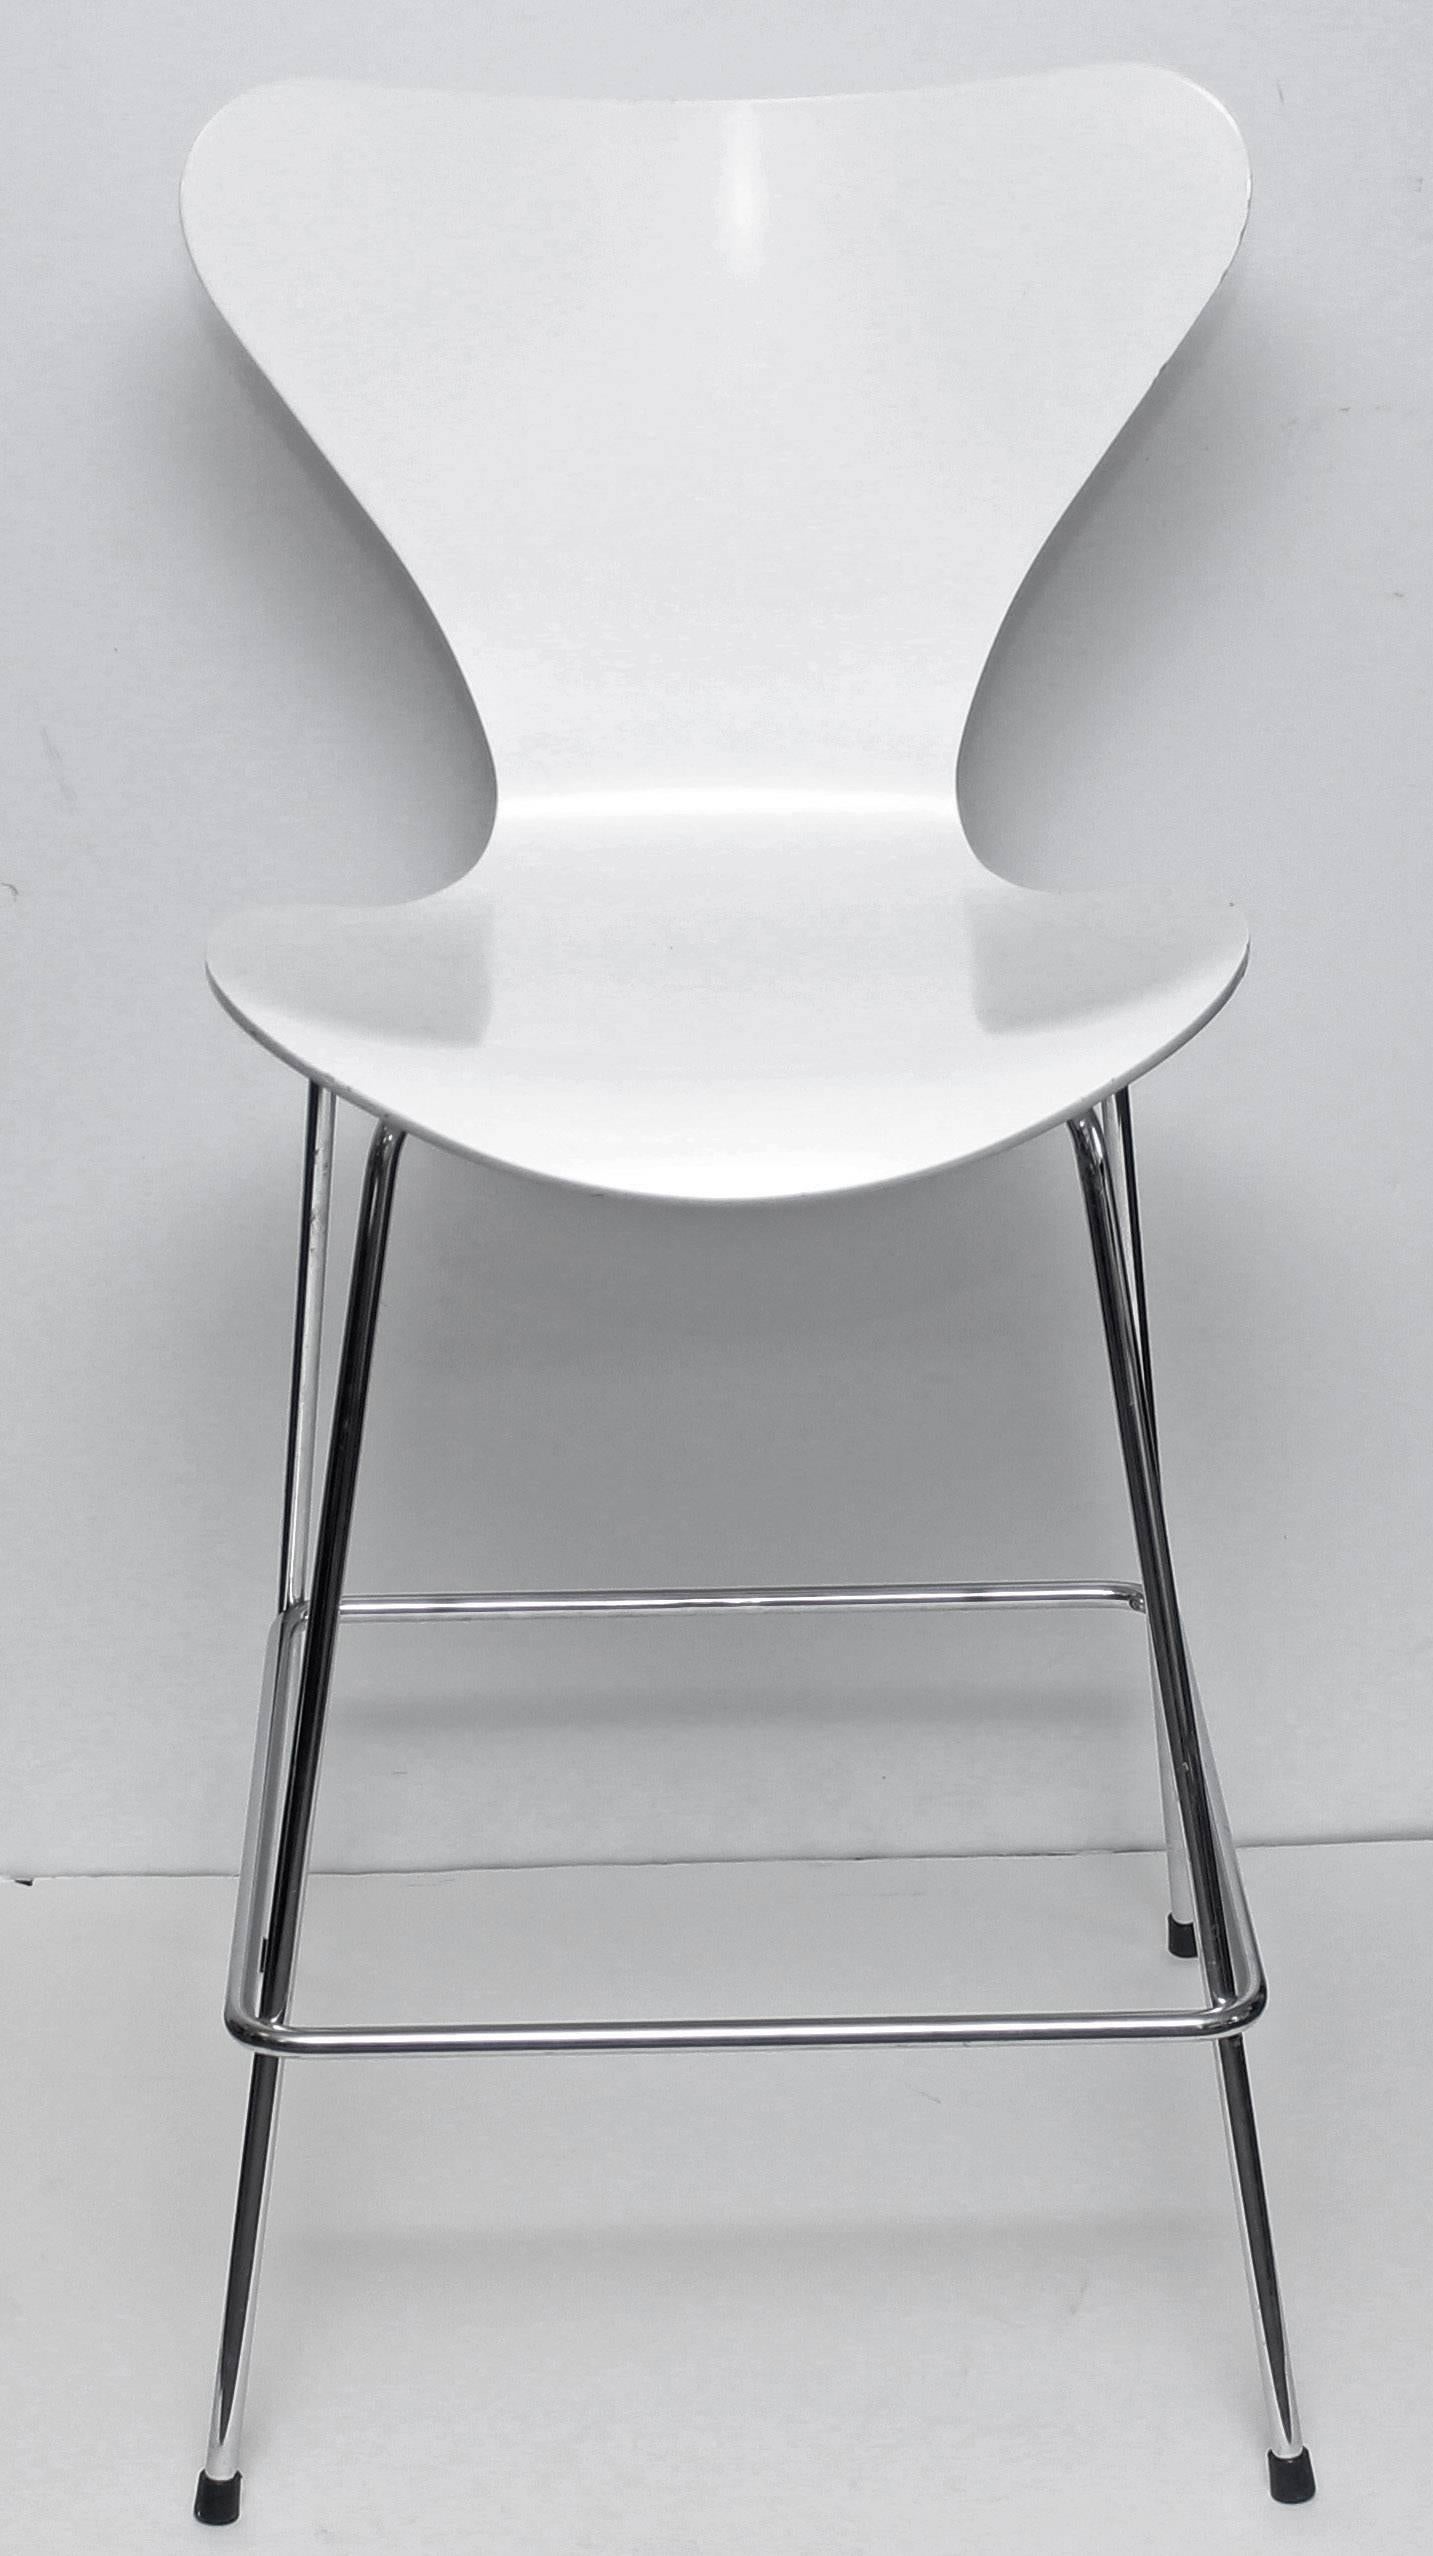 Lancome makeup stool for department store make up counters. Designed by Arne Jacobsen for Fritz Hansen. Bent plywood seat.